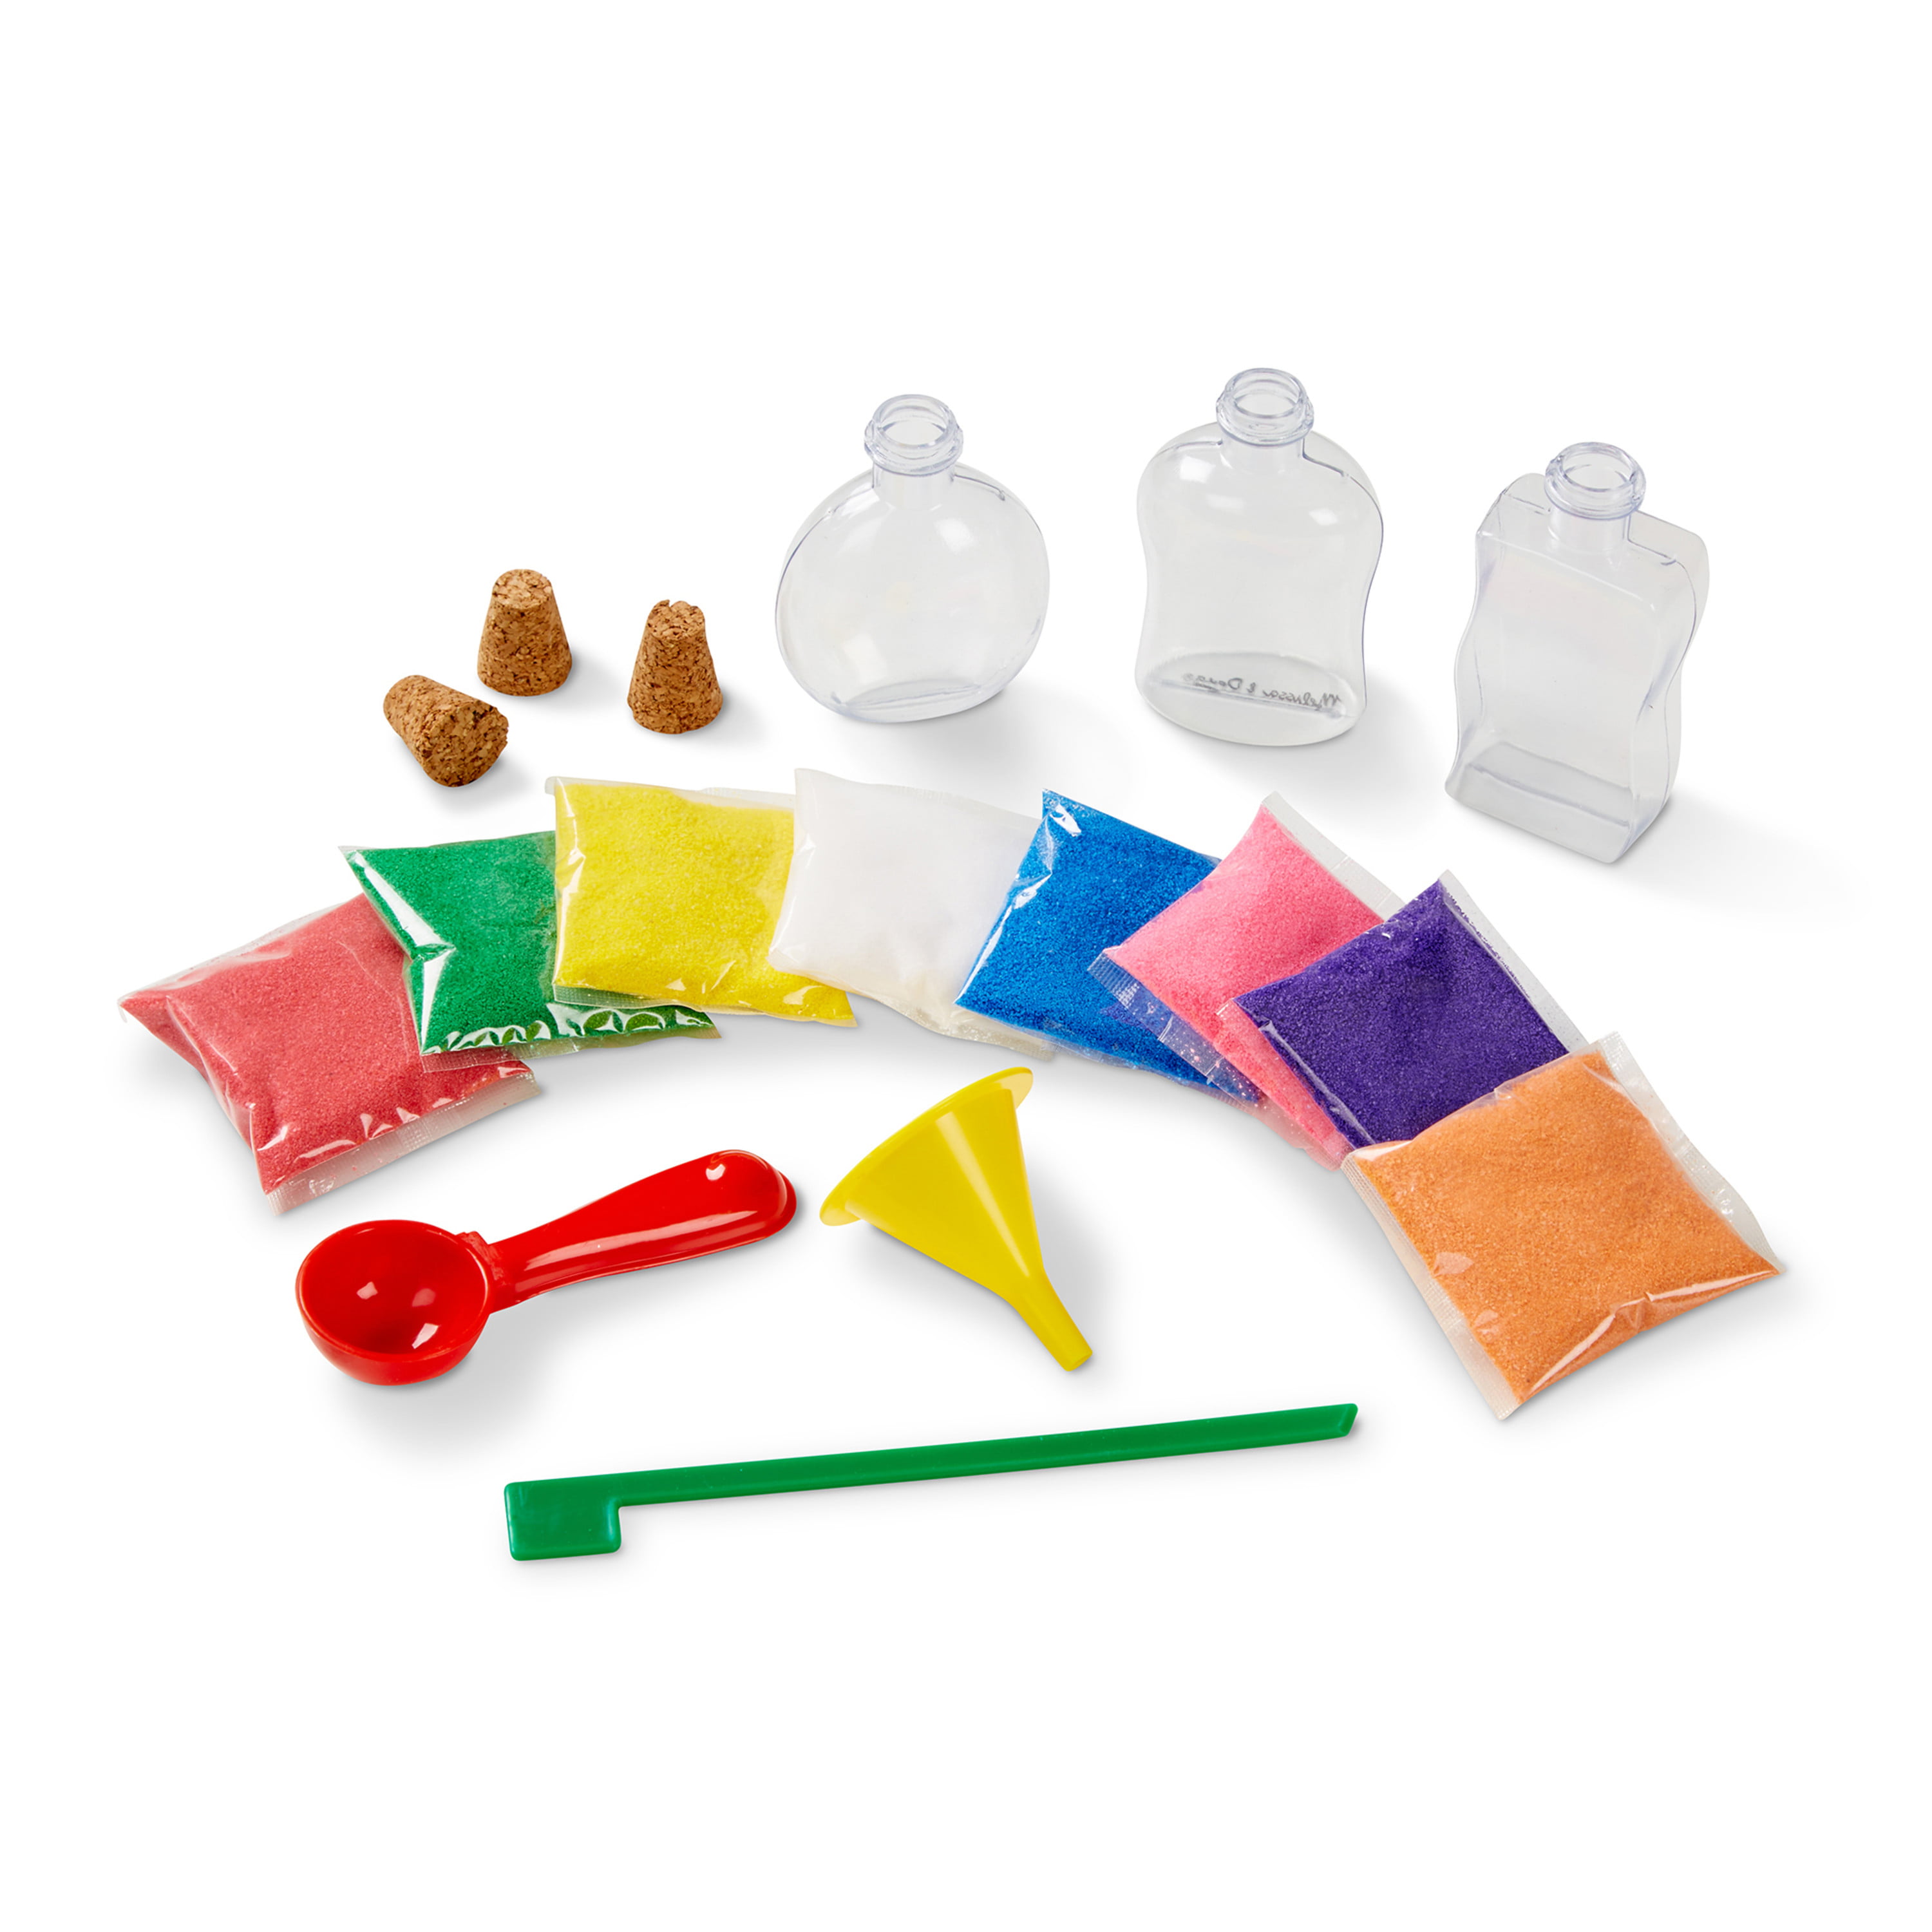 Sand Art Kit for Ages 3 to 10 - Everything Kids Need for Fun DIY Crafts -  16 Sand Peel&Sprinkle Pictures, 2 Sand Art Bottles, 8 Jars of Colored Sand